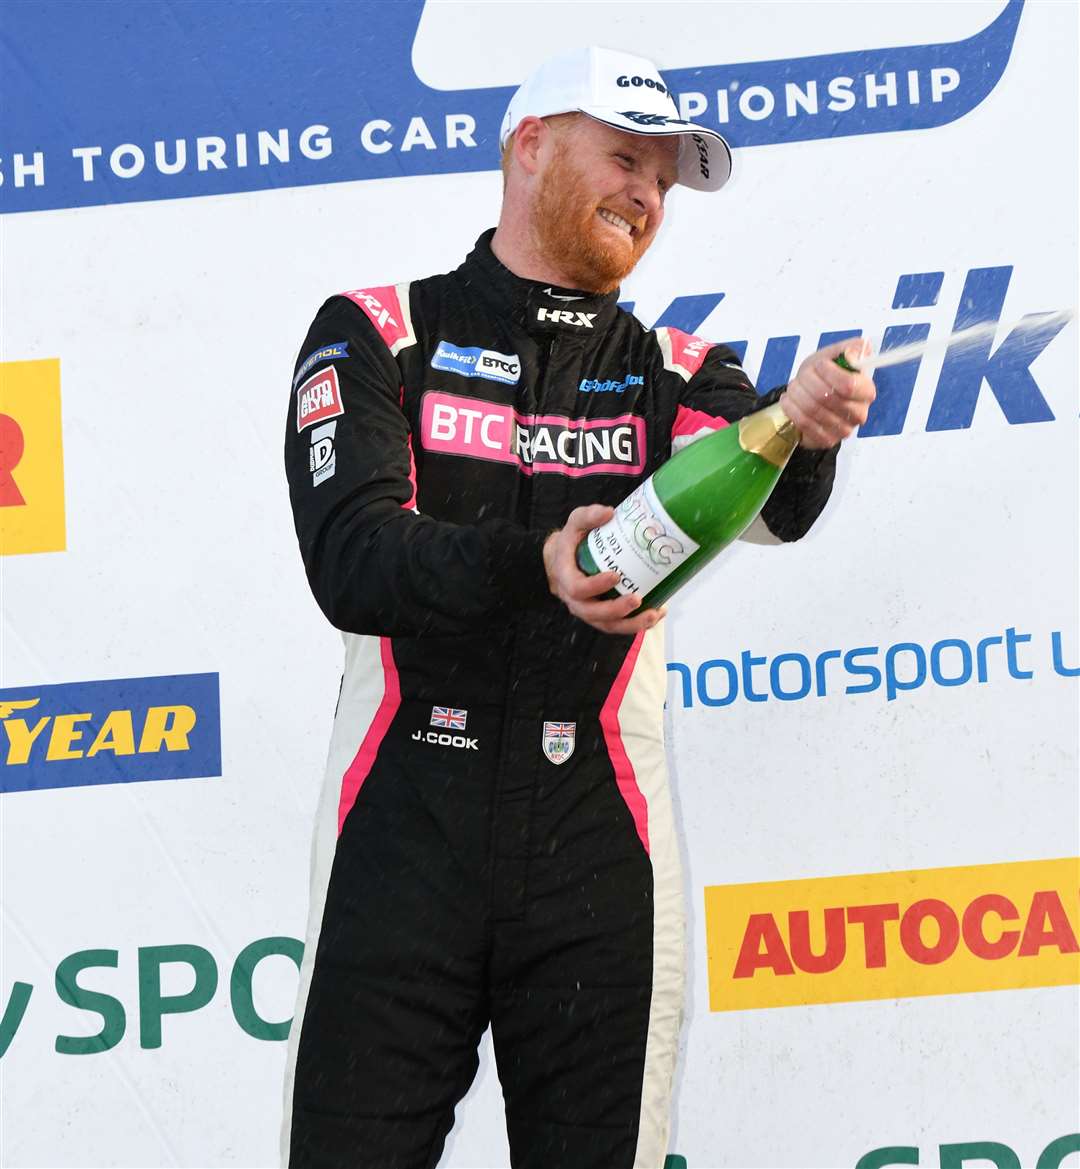 Bath's Josh Cook won the first two BTCC races for BTC Racing. He finished third in the overall standings, behind Sutton and Turkington. Tom Ingram and Hill rounded out the top five